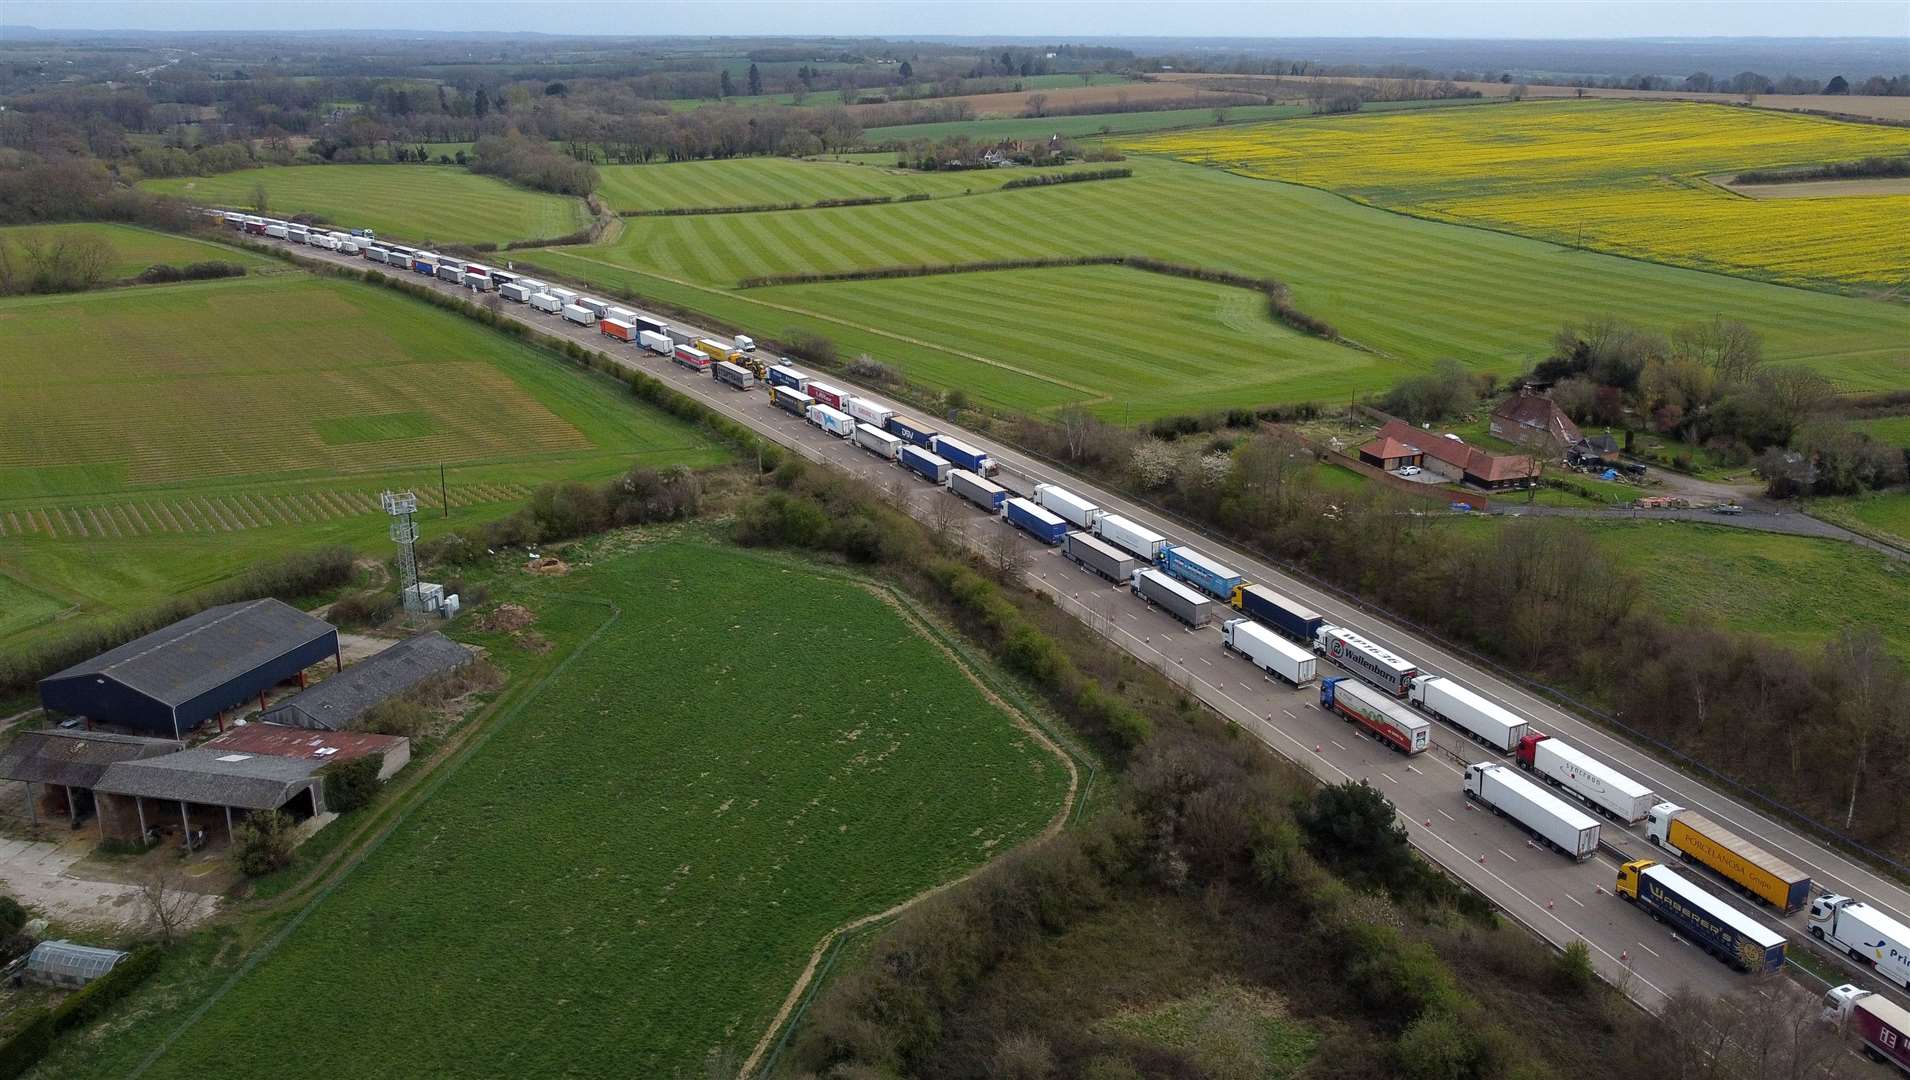 Lorries queue up on the M20 near Ashford in Kent as freight delays continue at the Port of Dover where P&O ferry services remain suspended after the company sacked 800 workers without notice (Gareth Fuller/PA)